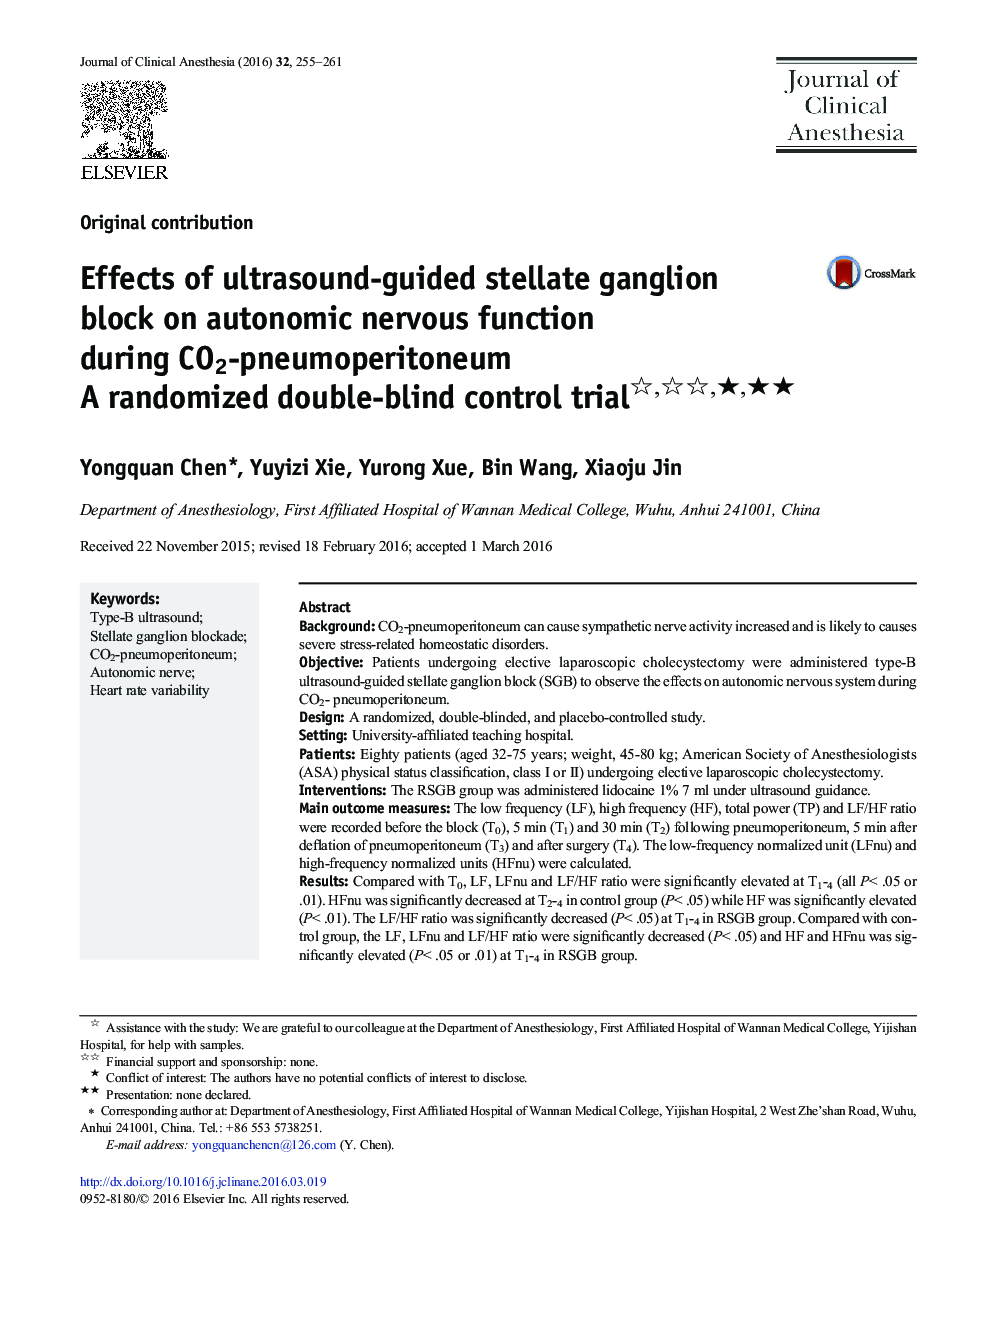 Effects of ultrasound-guided stellate ganglion block on autonomic nervous function during CO2-pneumoperitoneum